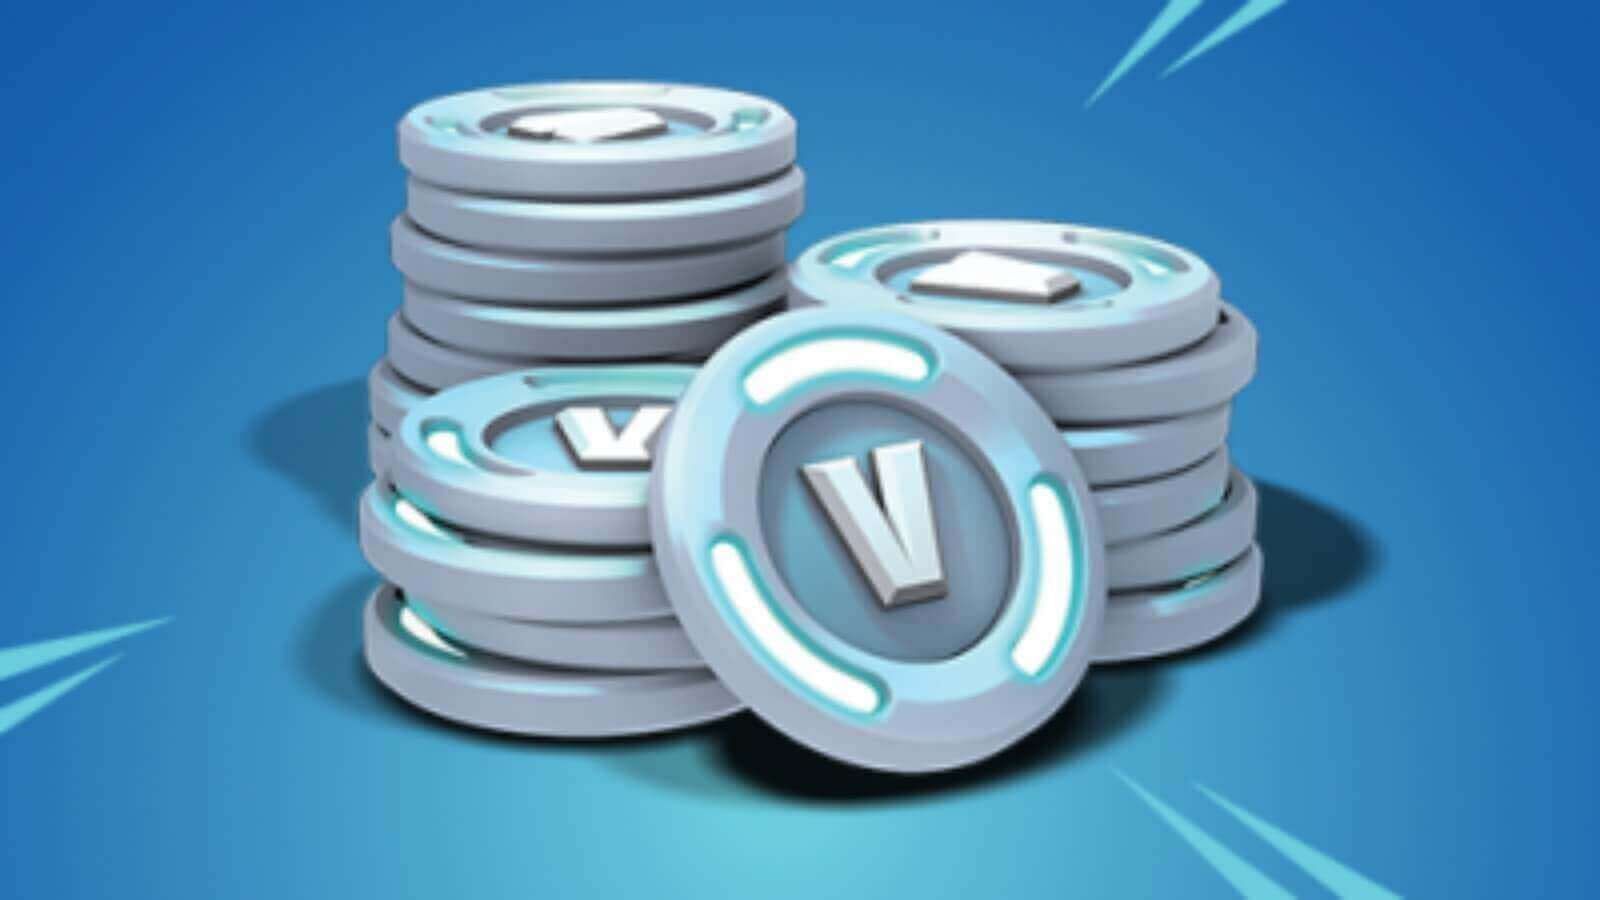 V-bucks can be purchased inside the game (Image via Epic Games)